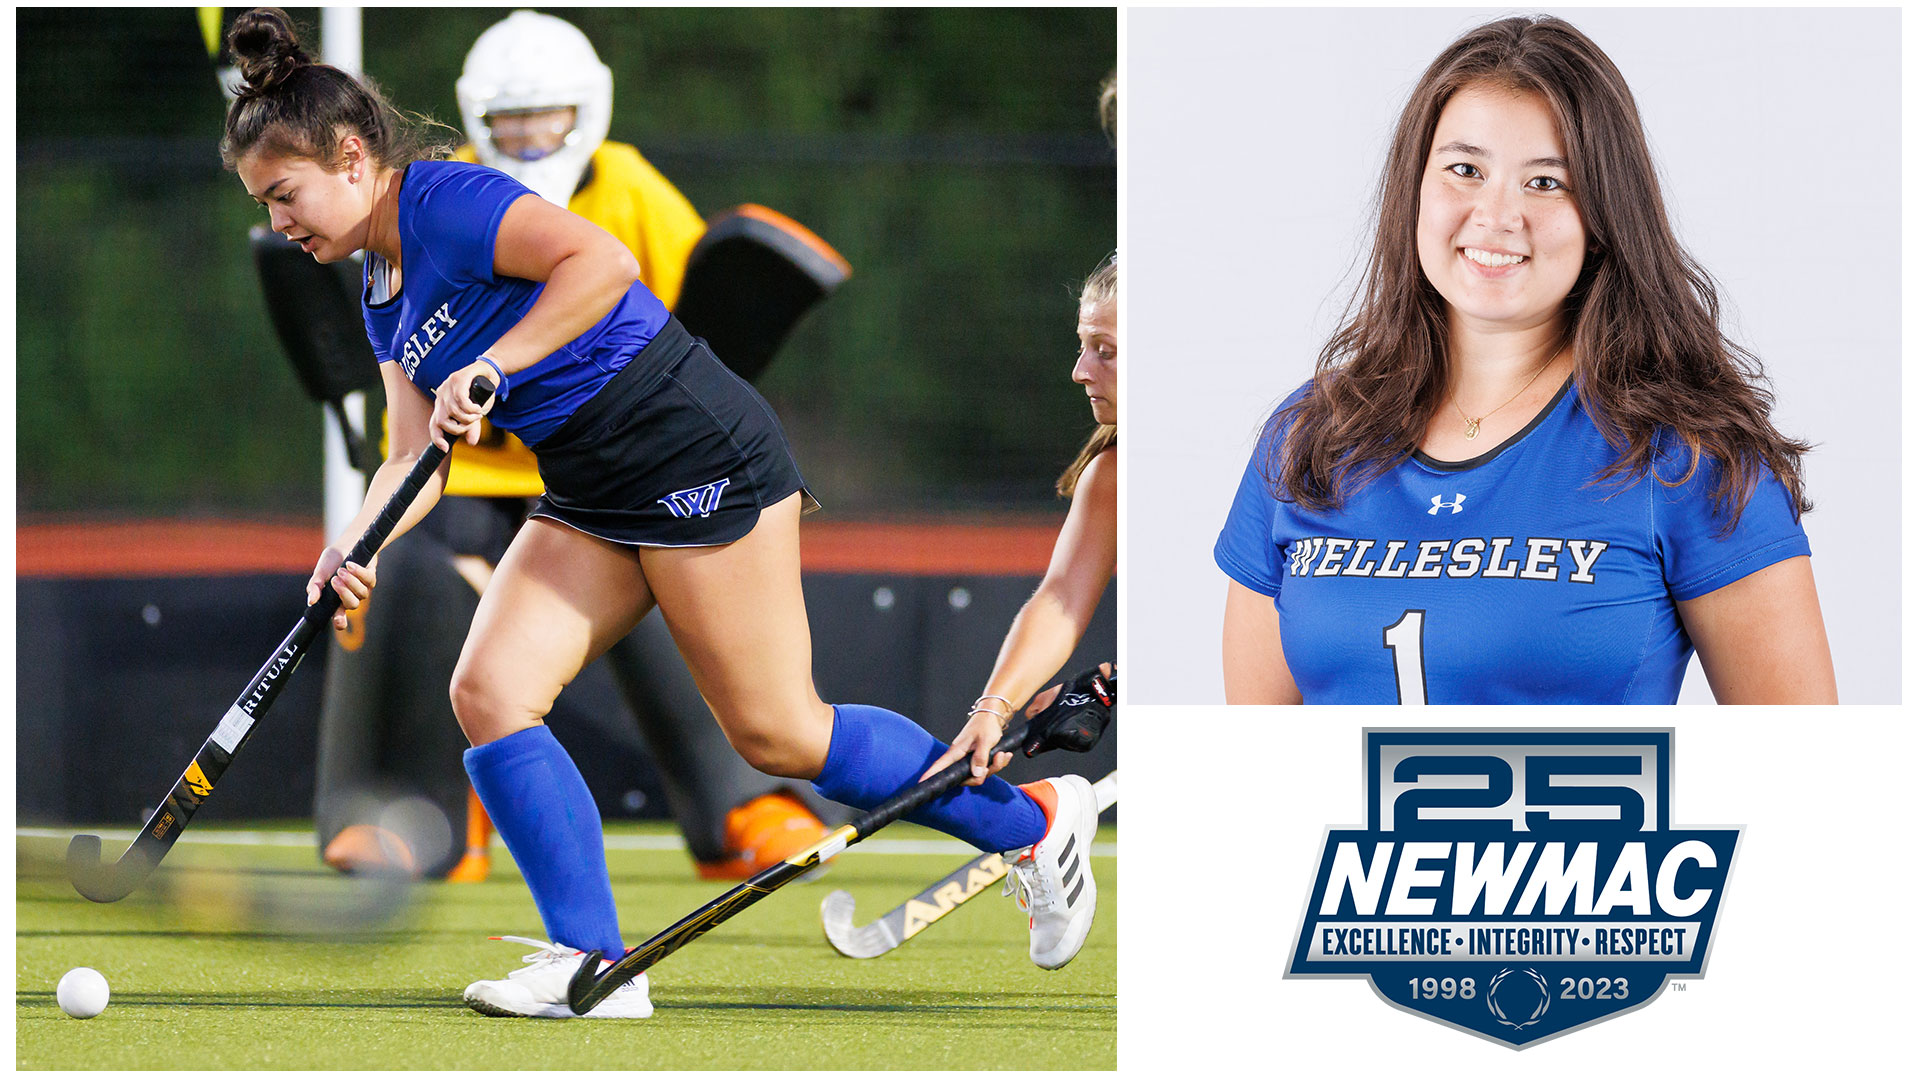 Alex Lenart has been named the NEWMAC Field Hockey Offensive Athlete of the Week (Frank Poulin).